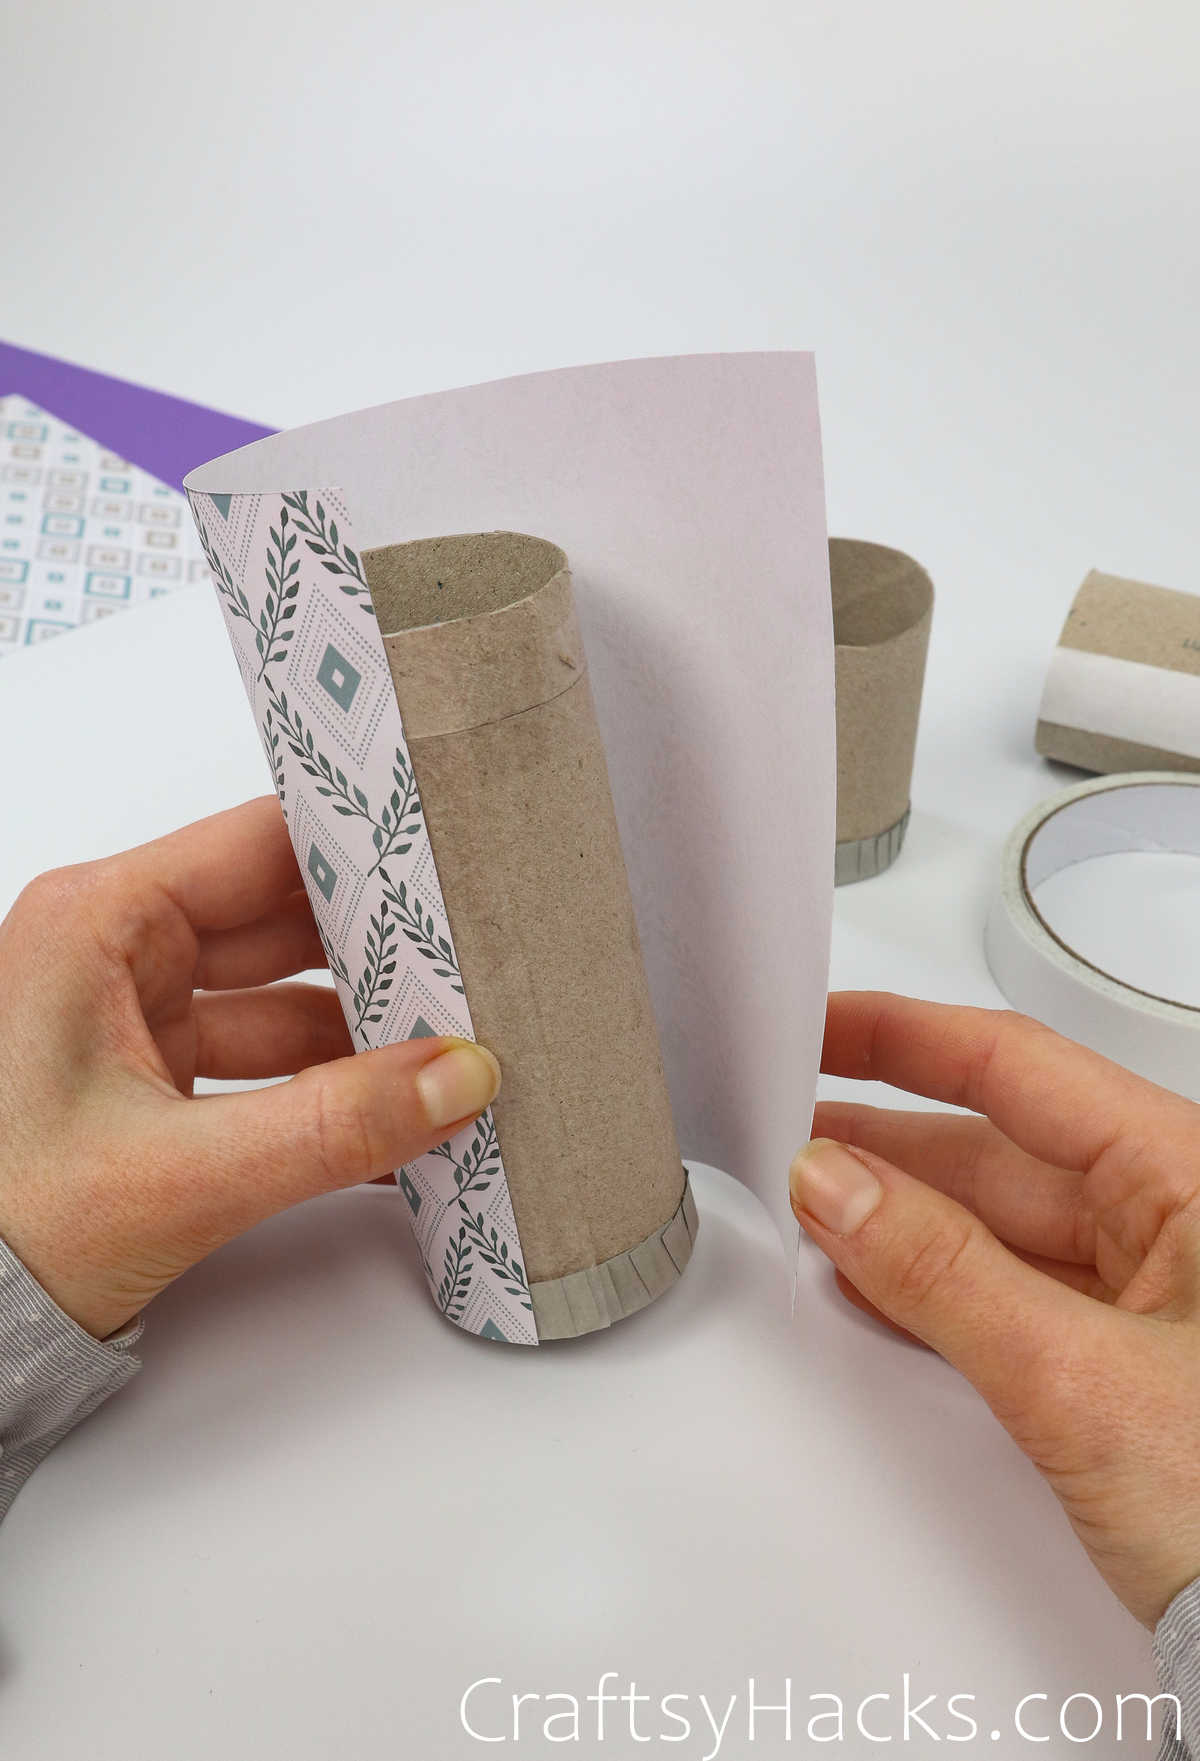 wrap tubes with patterned paper